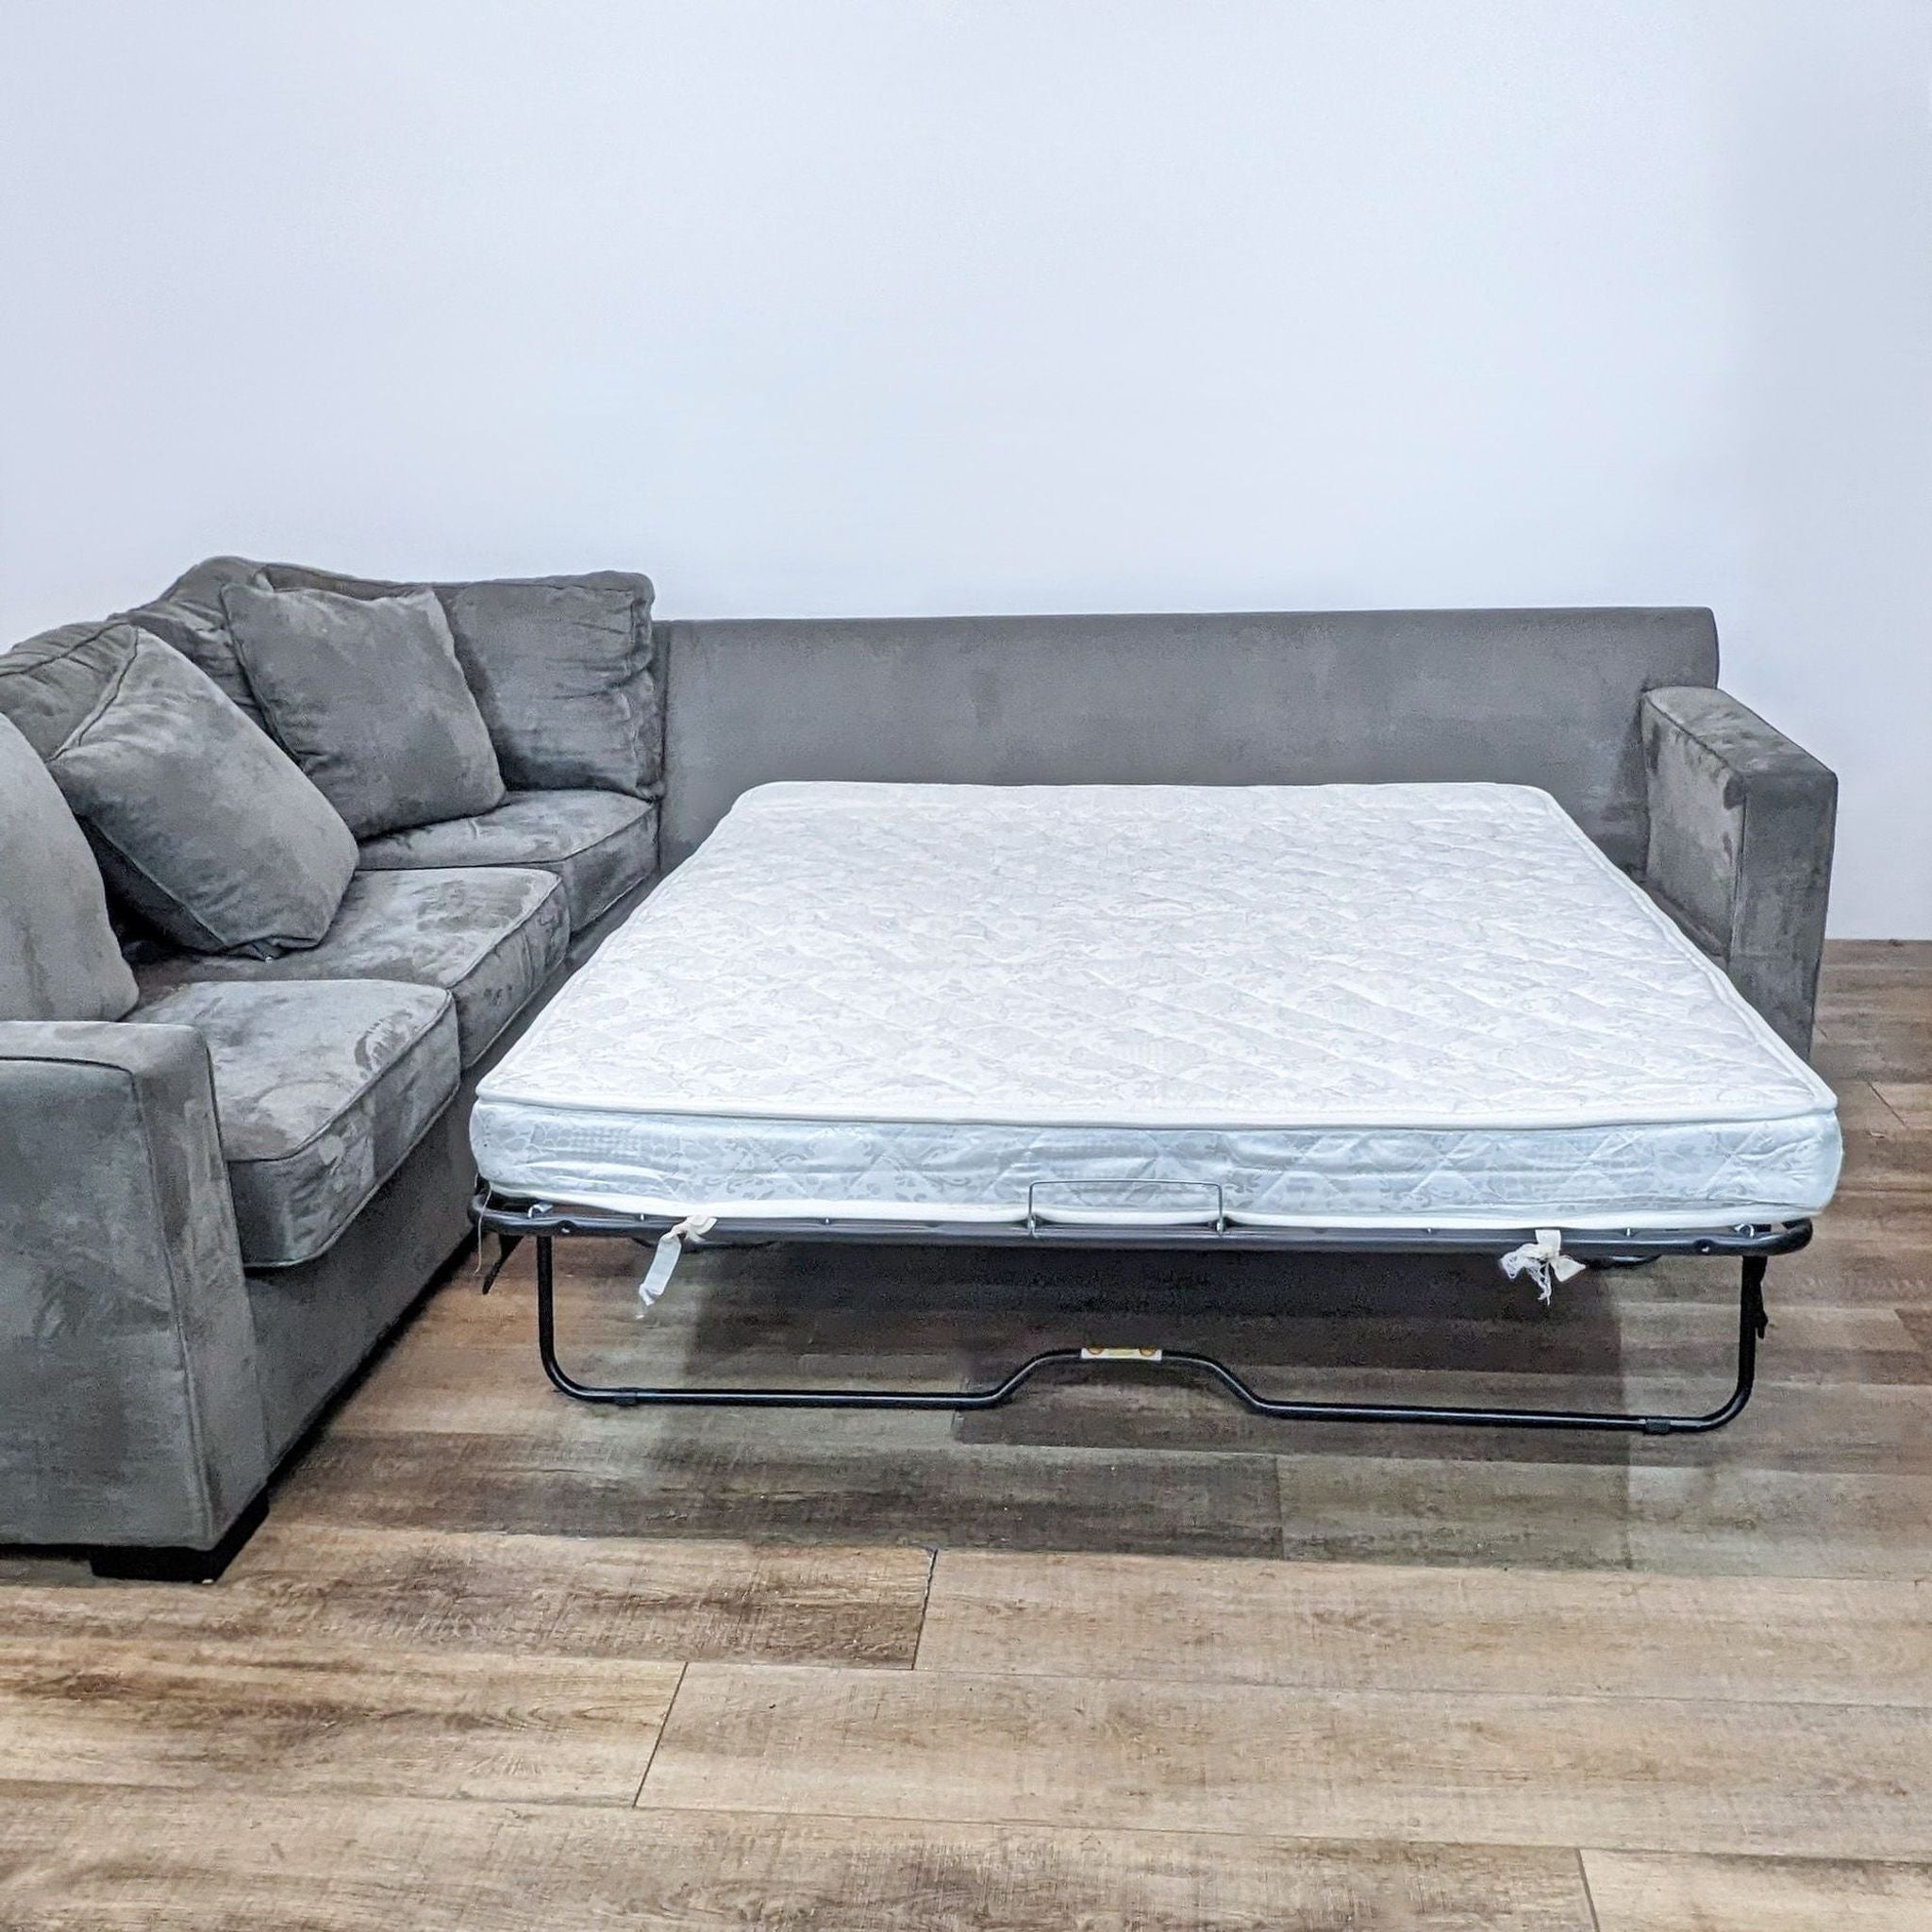 Alt text 2: "The same Scandinavian Designs sectional sofa with the queen sleeper component extended, showcasing the mattress, against a neutral backdrop."